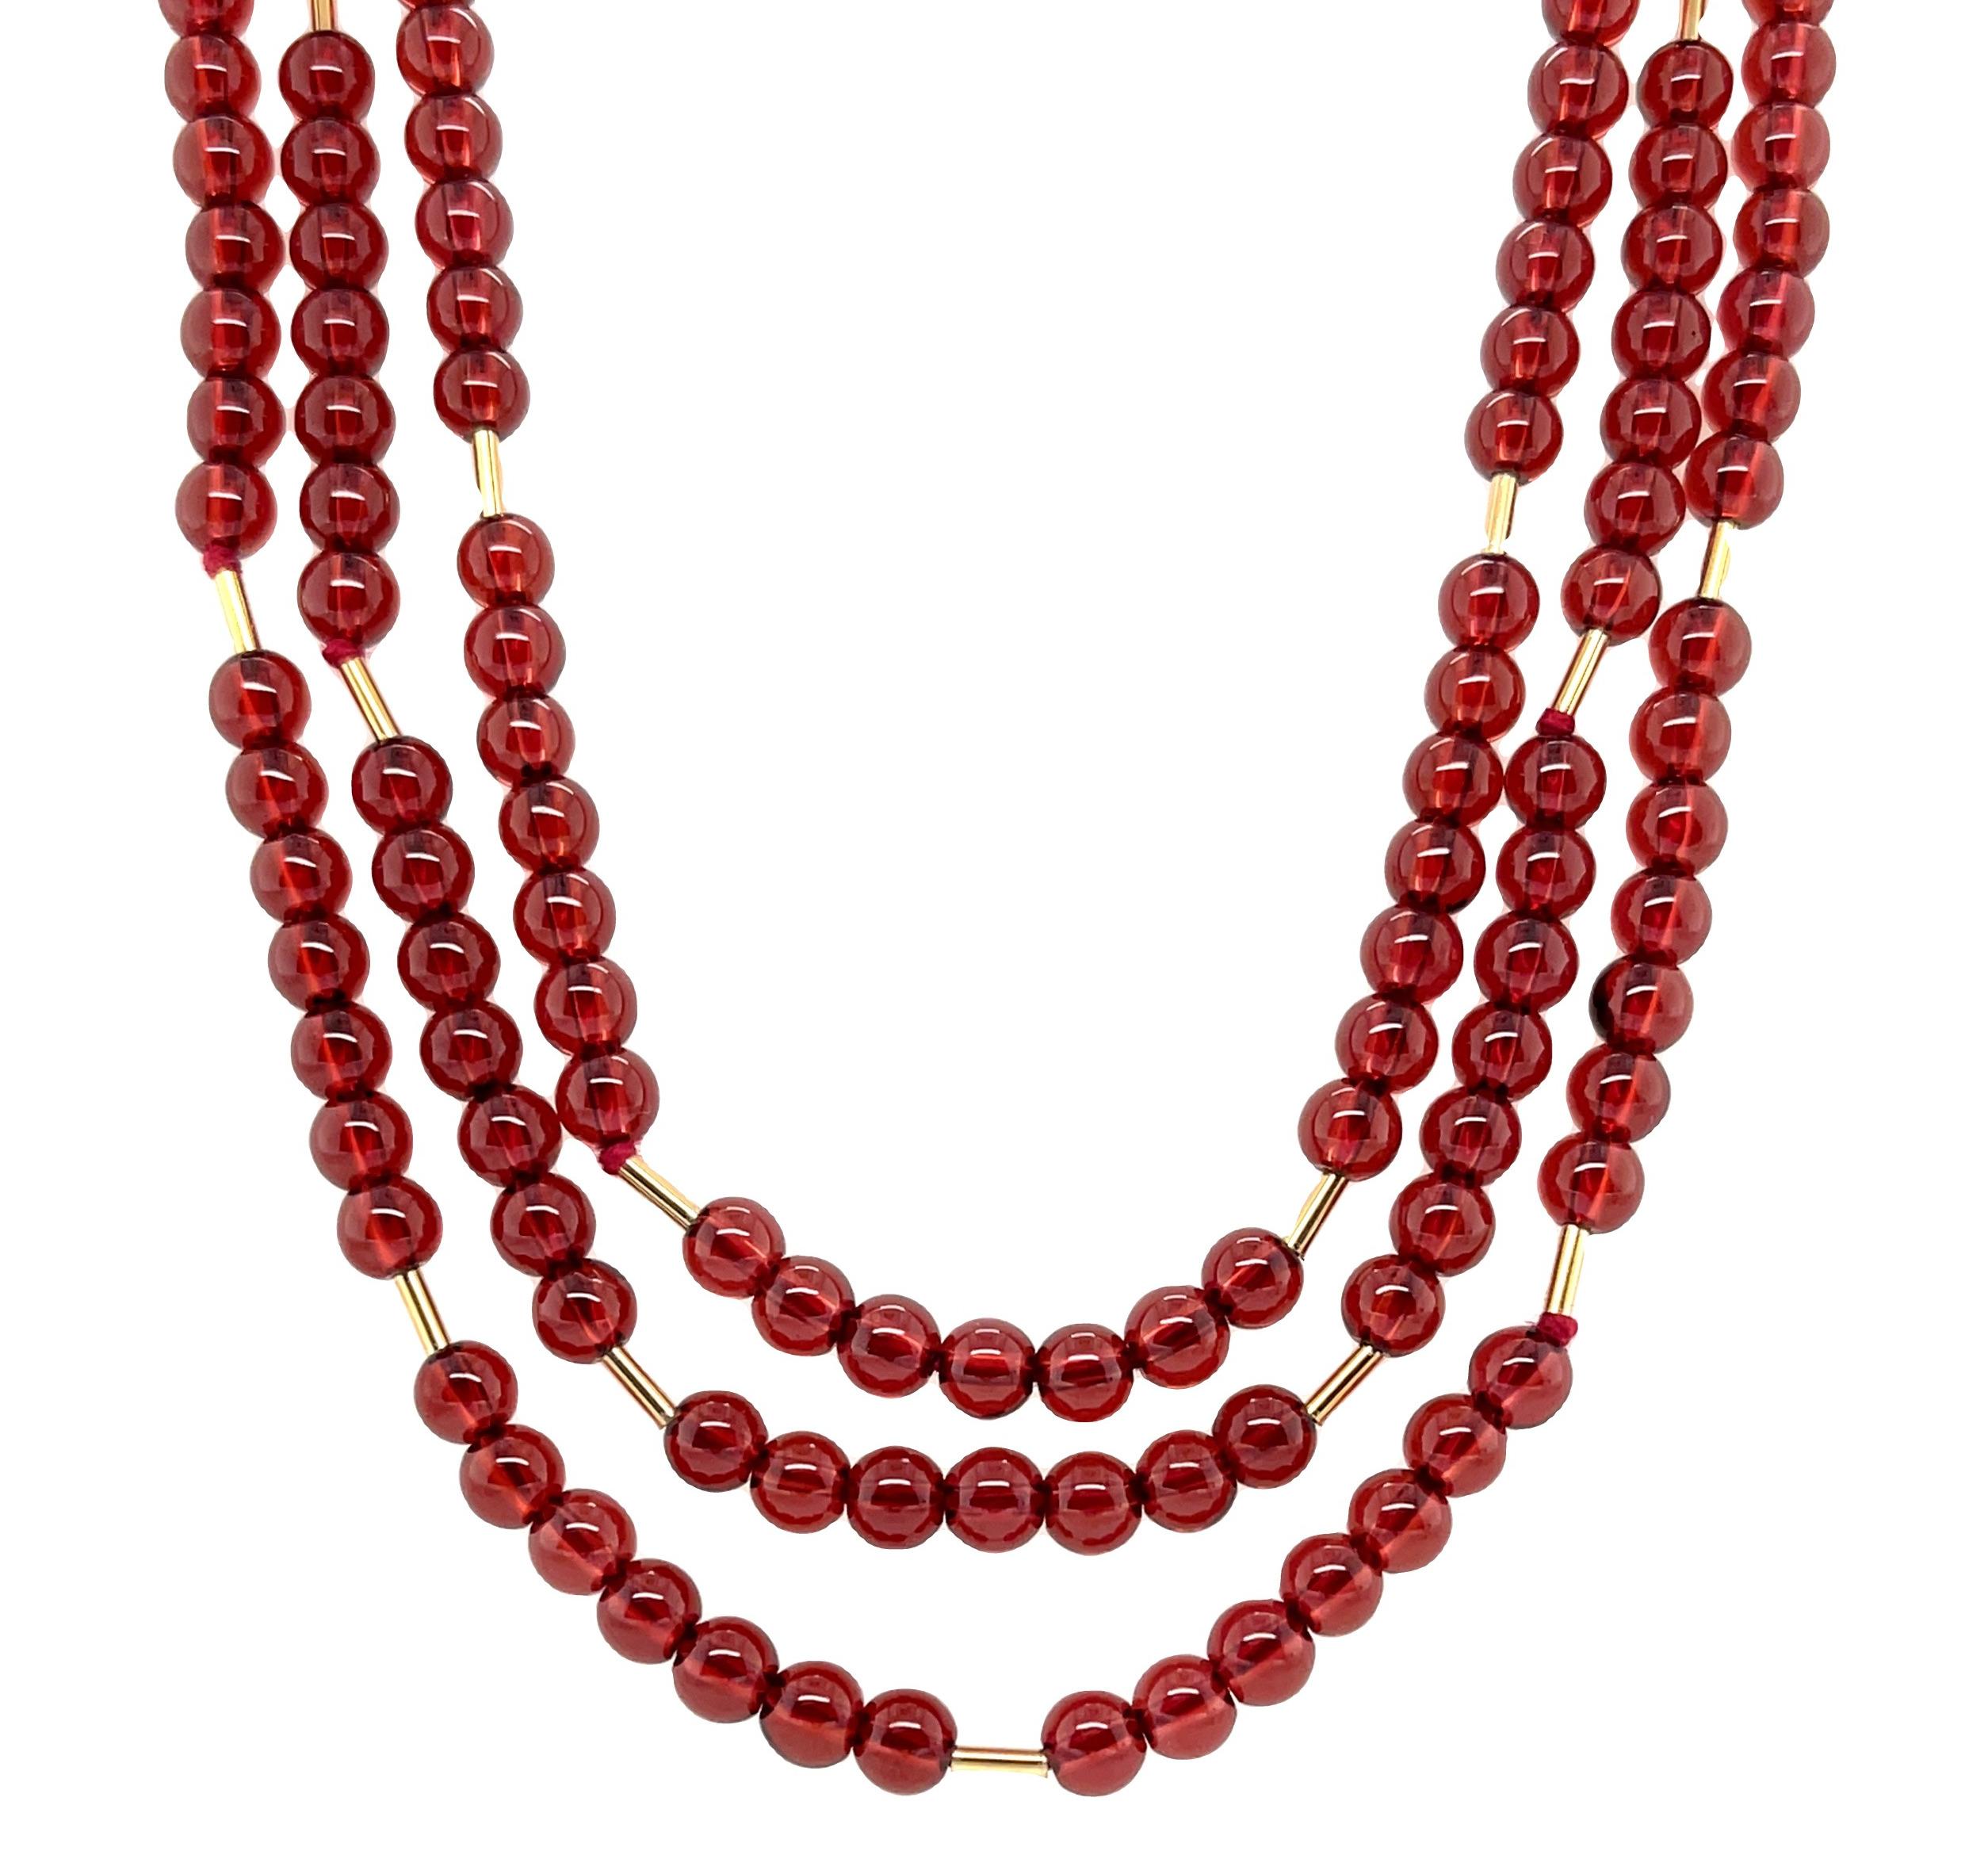 
This extra-long strand of cranberry color garnet beads can be worn in many different ways! Wear it as a triple strand for work, a double strand for an afternoon outing, or as a single strand for an ultra-feminine, evening look! The beautifully